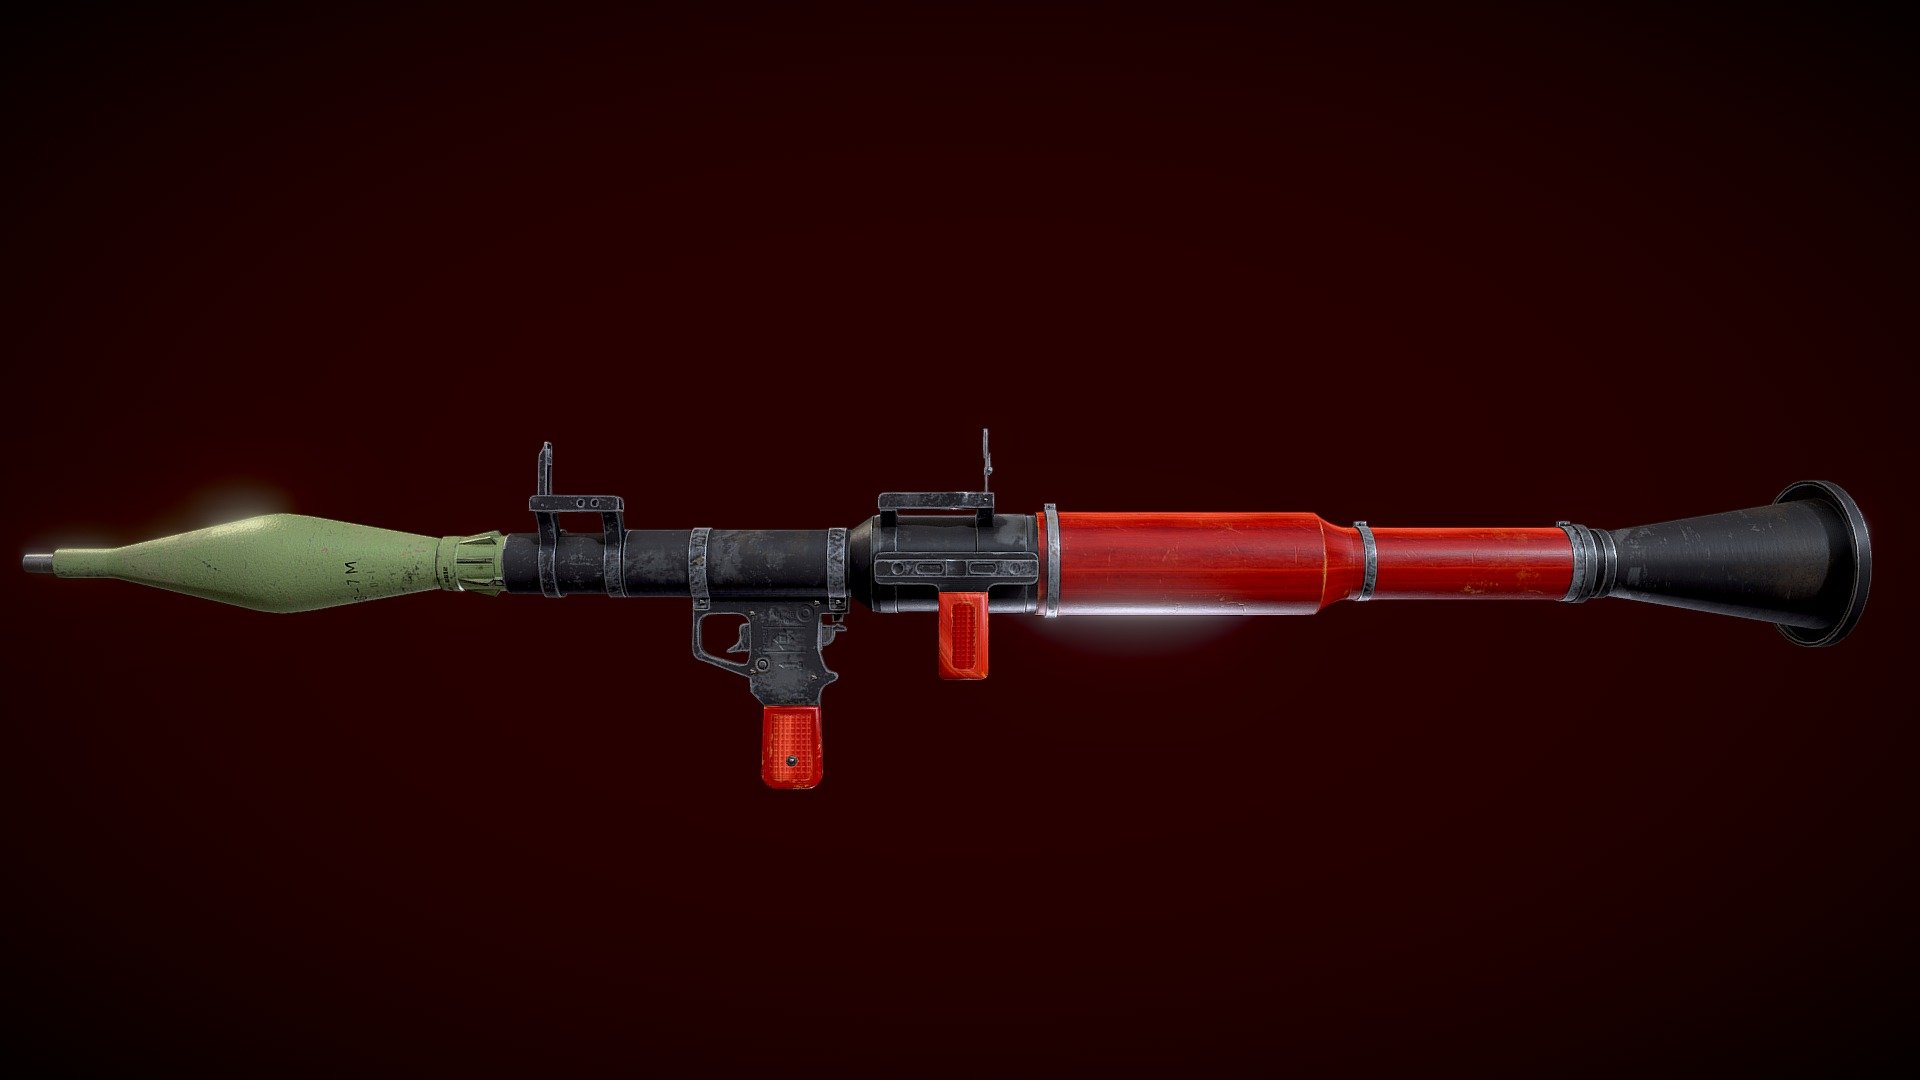 RPG-7 is a portable, reusable, unguided, shoulder-launched, anti-tank, rocket-propelled grenade launcher. The RPG-7 and its predecessor, the RPG-2, were designed by the Soviet Union. The ruggedness, simplicity, low cost, and effectiveness of the RPG-7 has made it the most widely used anti-armor weapon in the world.
This asset has 6,259 verts and 11k triangles, the components are pivoted to carry out proper functionality. Mesh was made in blender and has PBR textures from Substance painter. Asset was made with the intention of game readiness 3d model